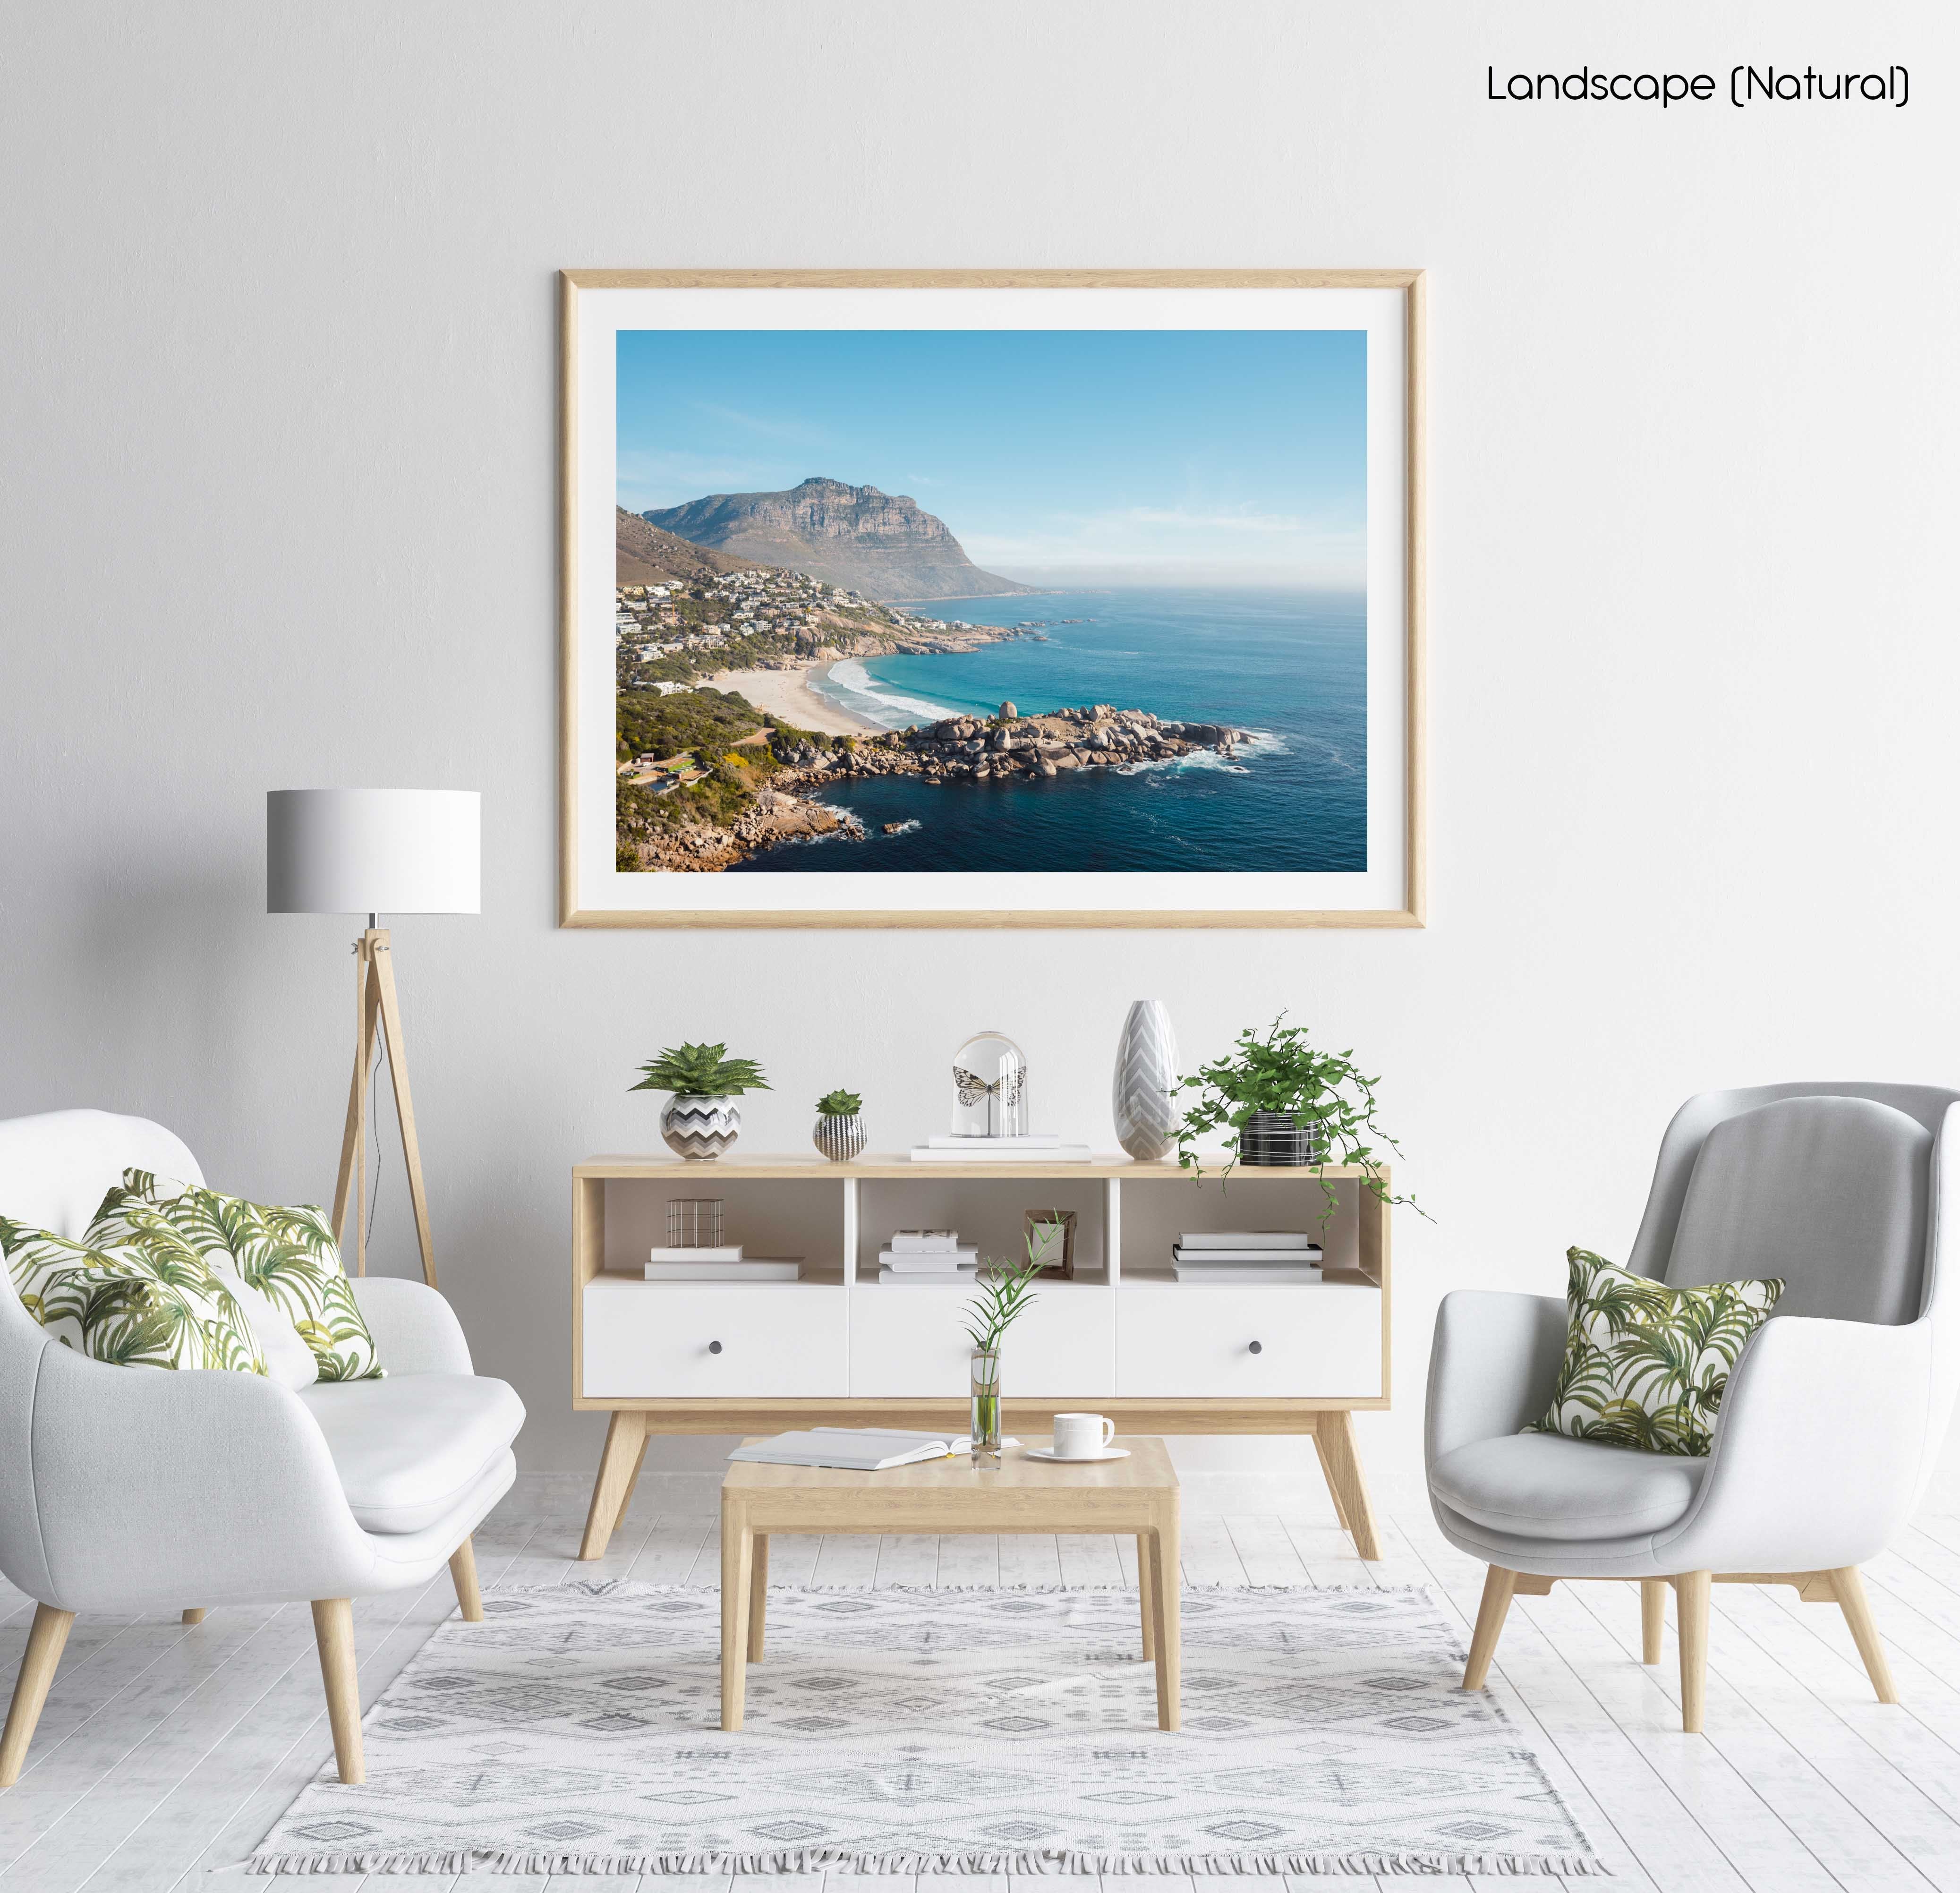 Llandudno Beach and its mountains seen from above in a natural fine art frame